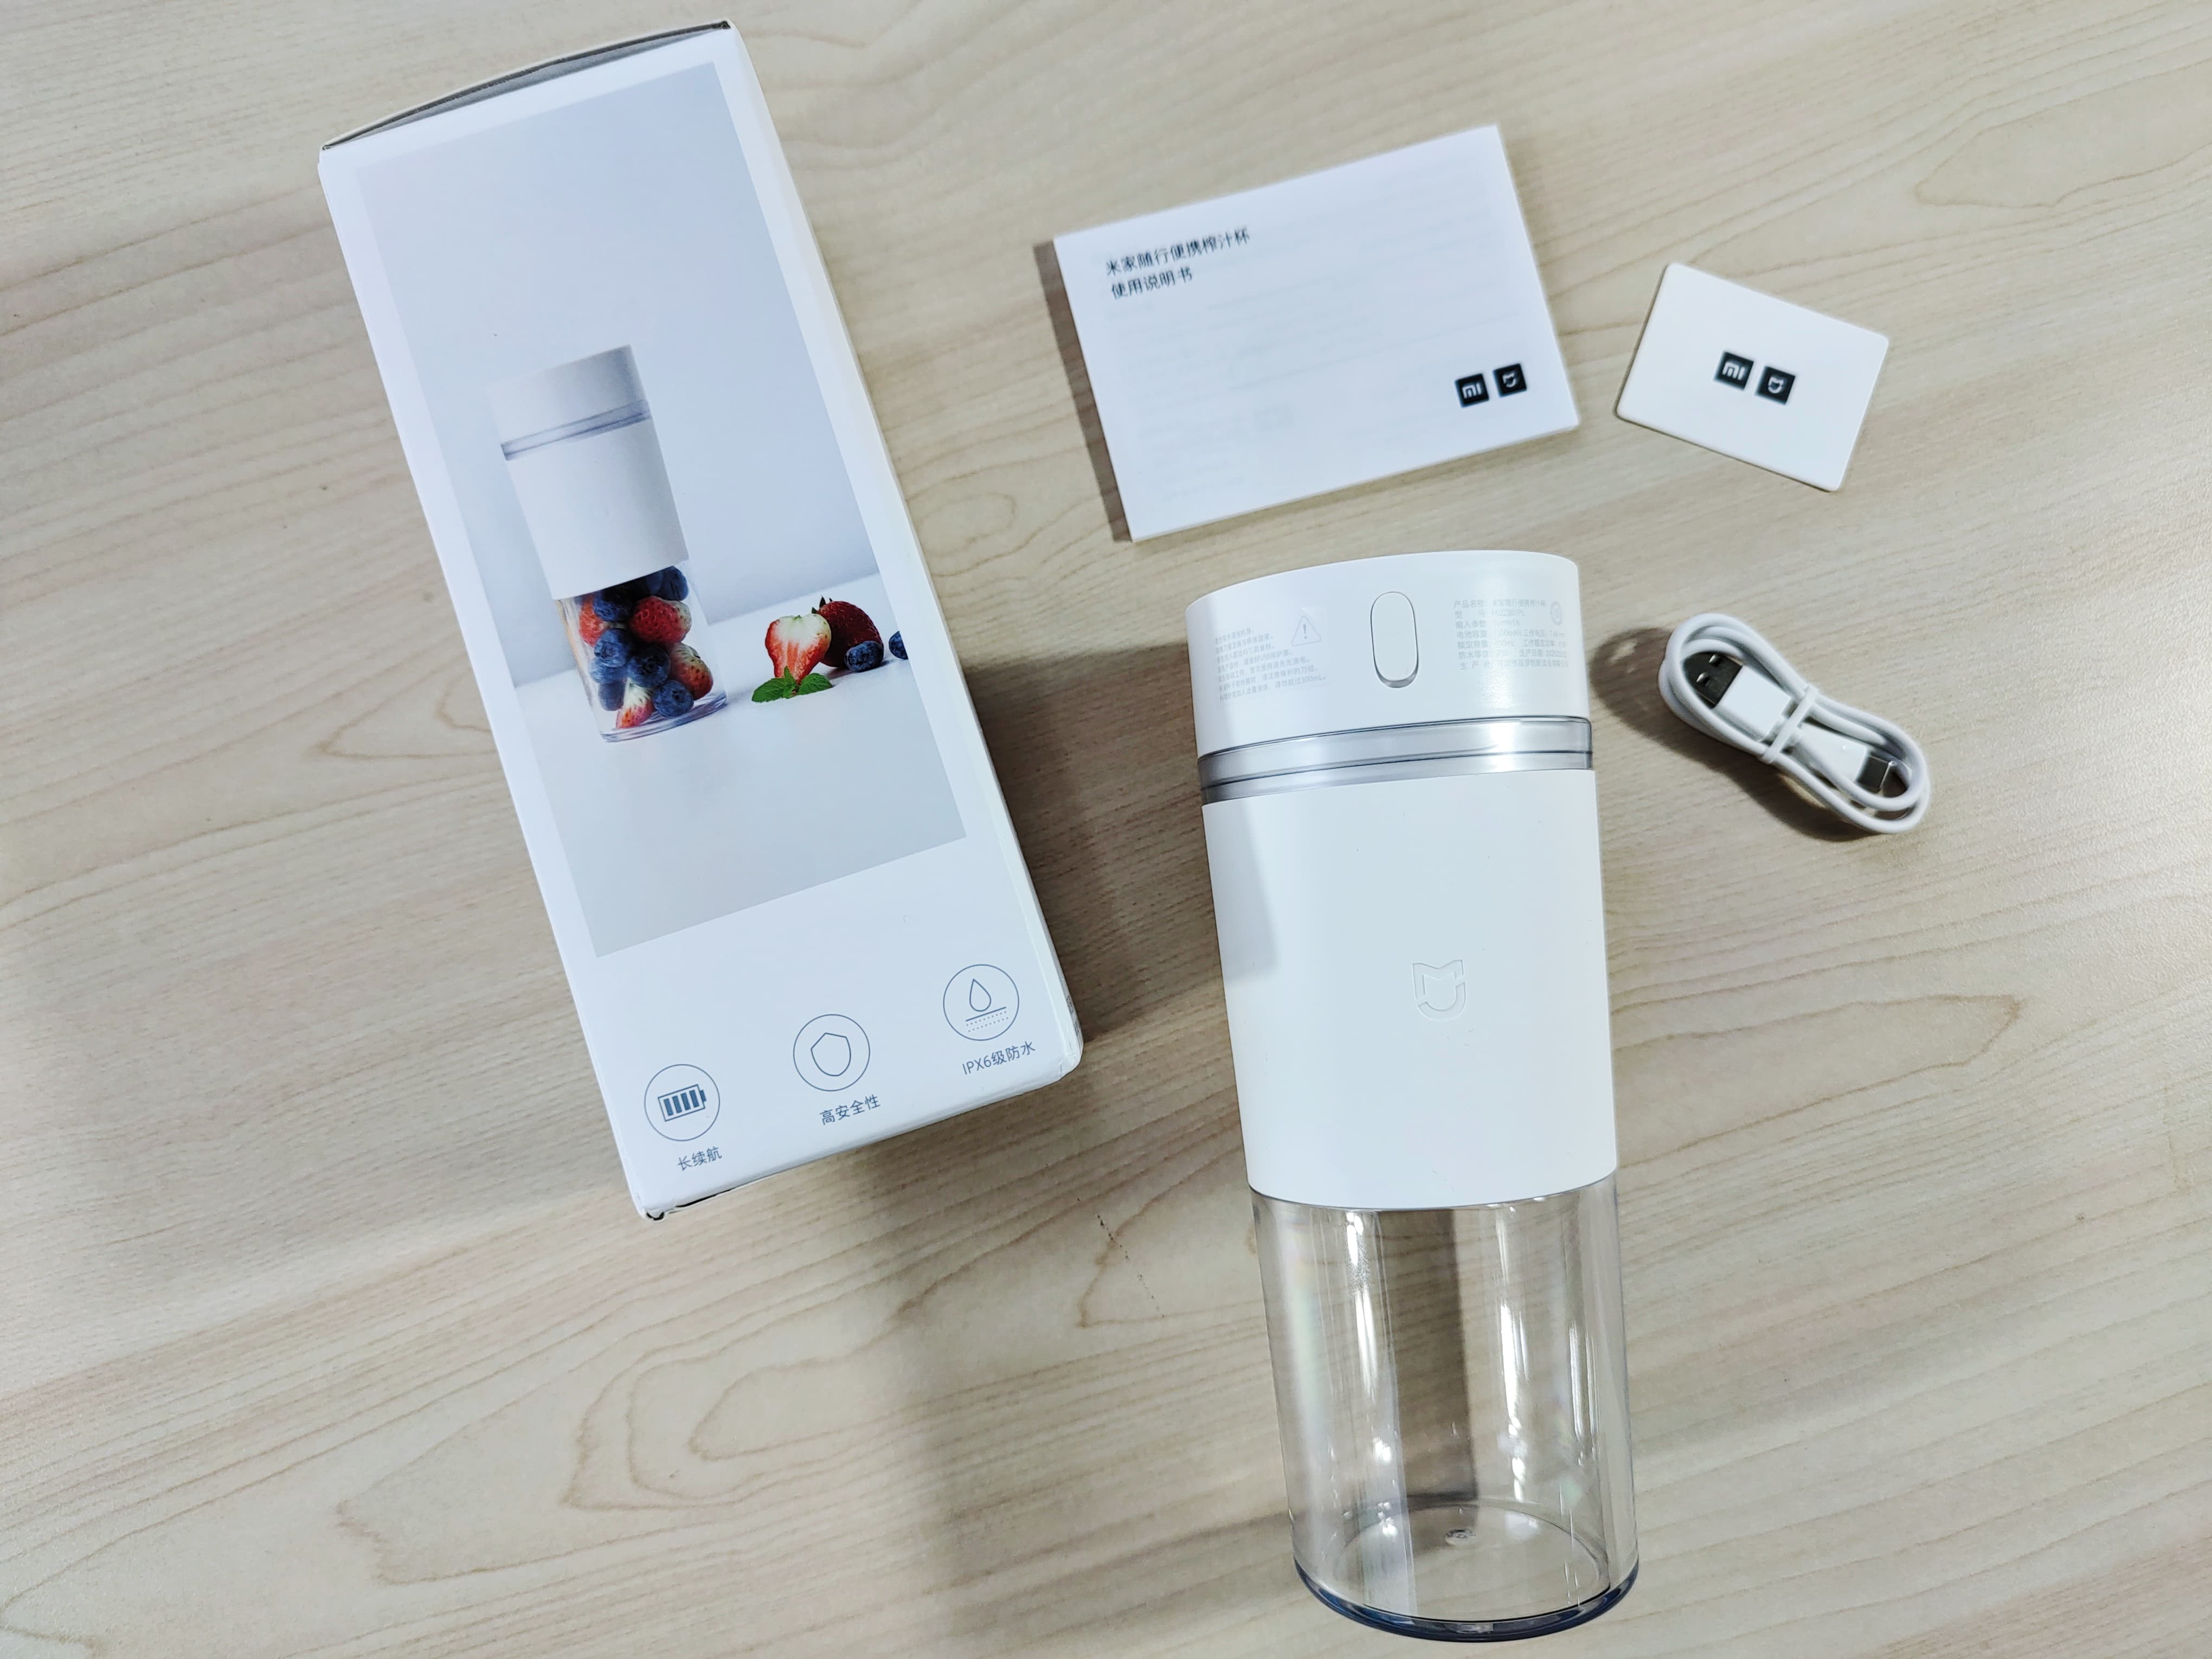 The Mijia crowdfunding little artifact is only 89 yuan out of the box